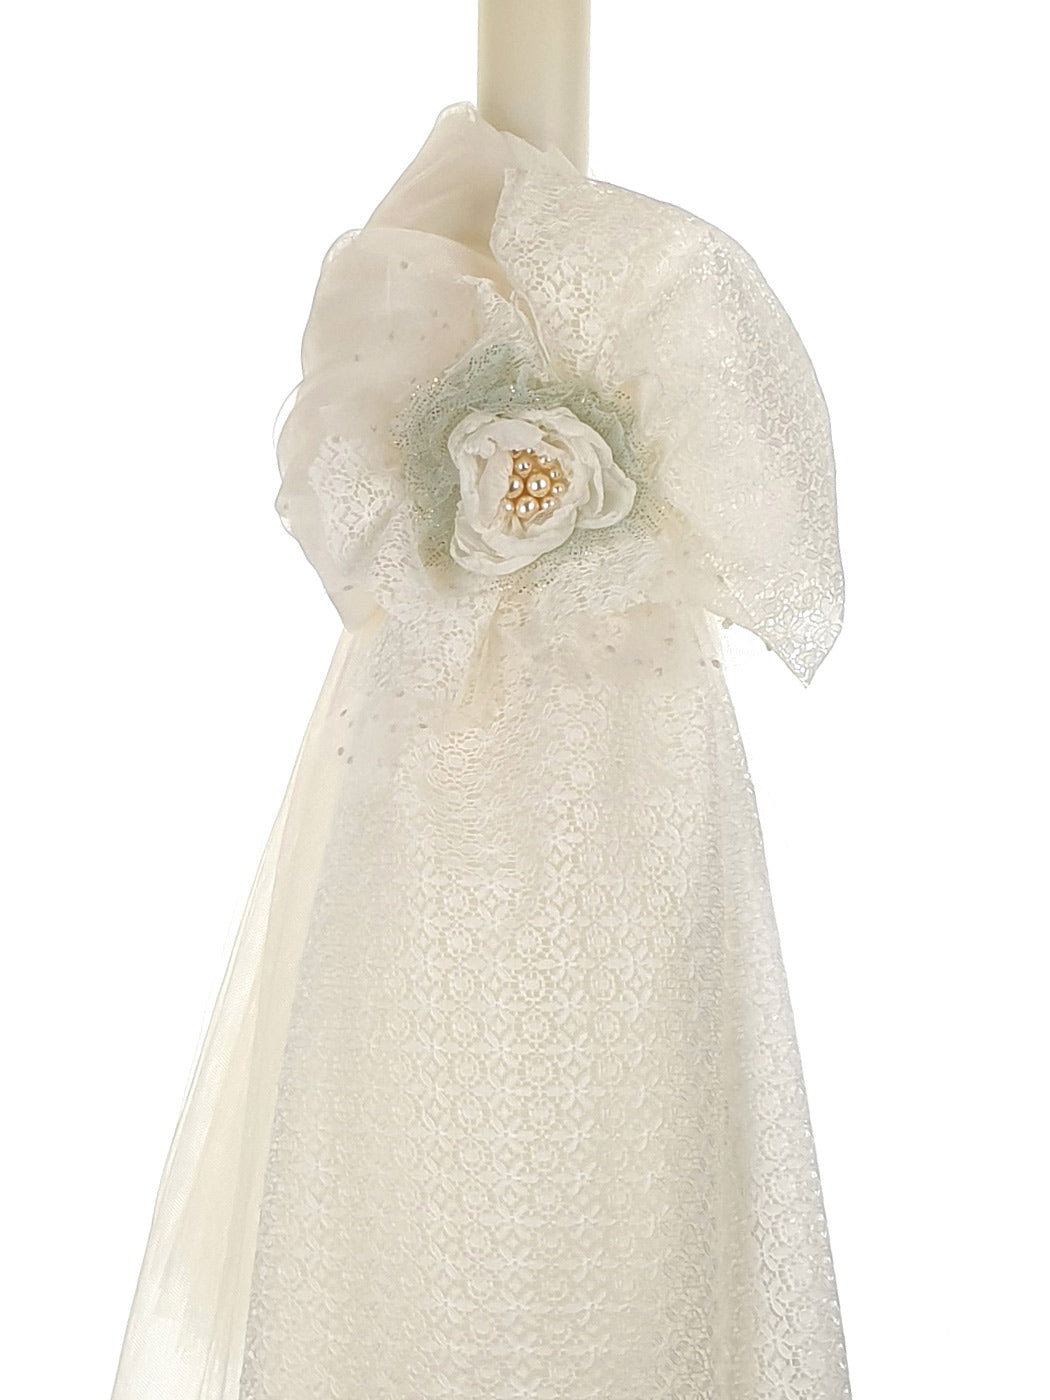 Baptism candle with Lace - HARIS